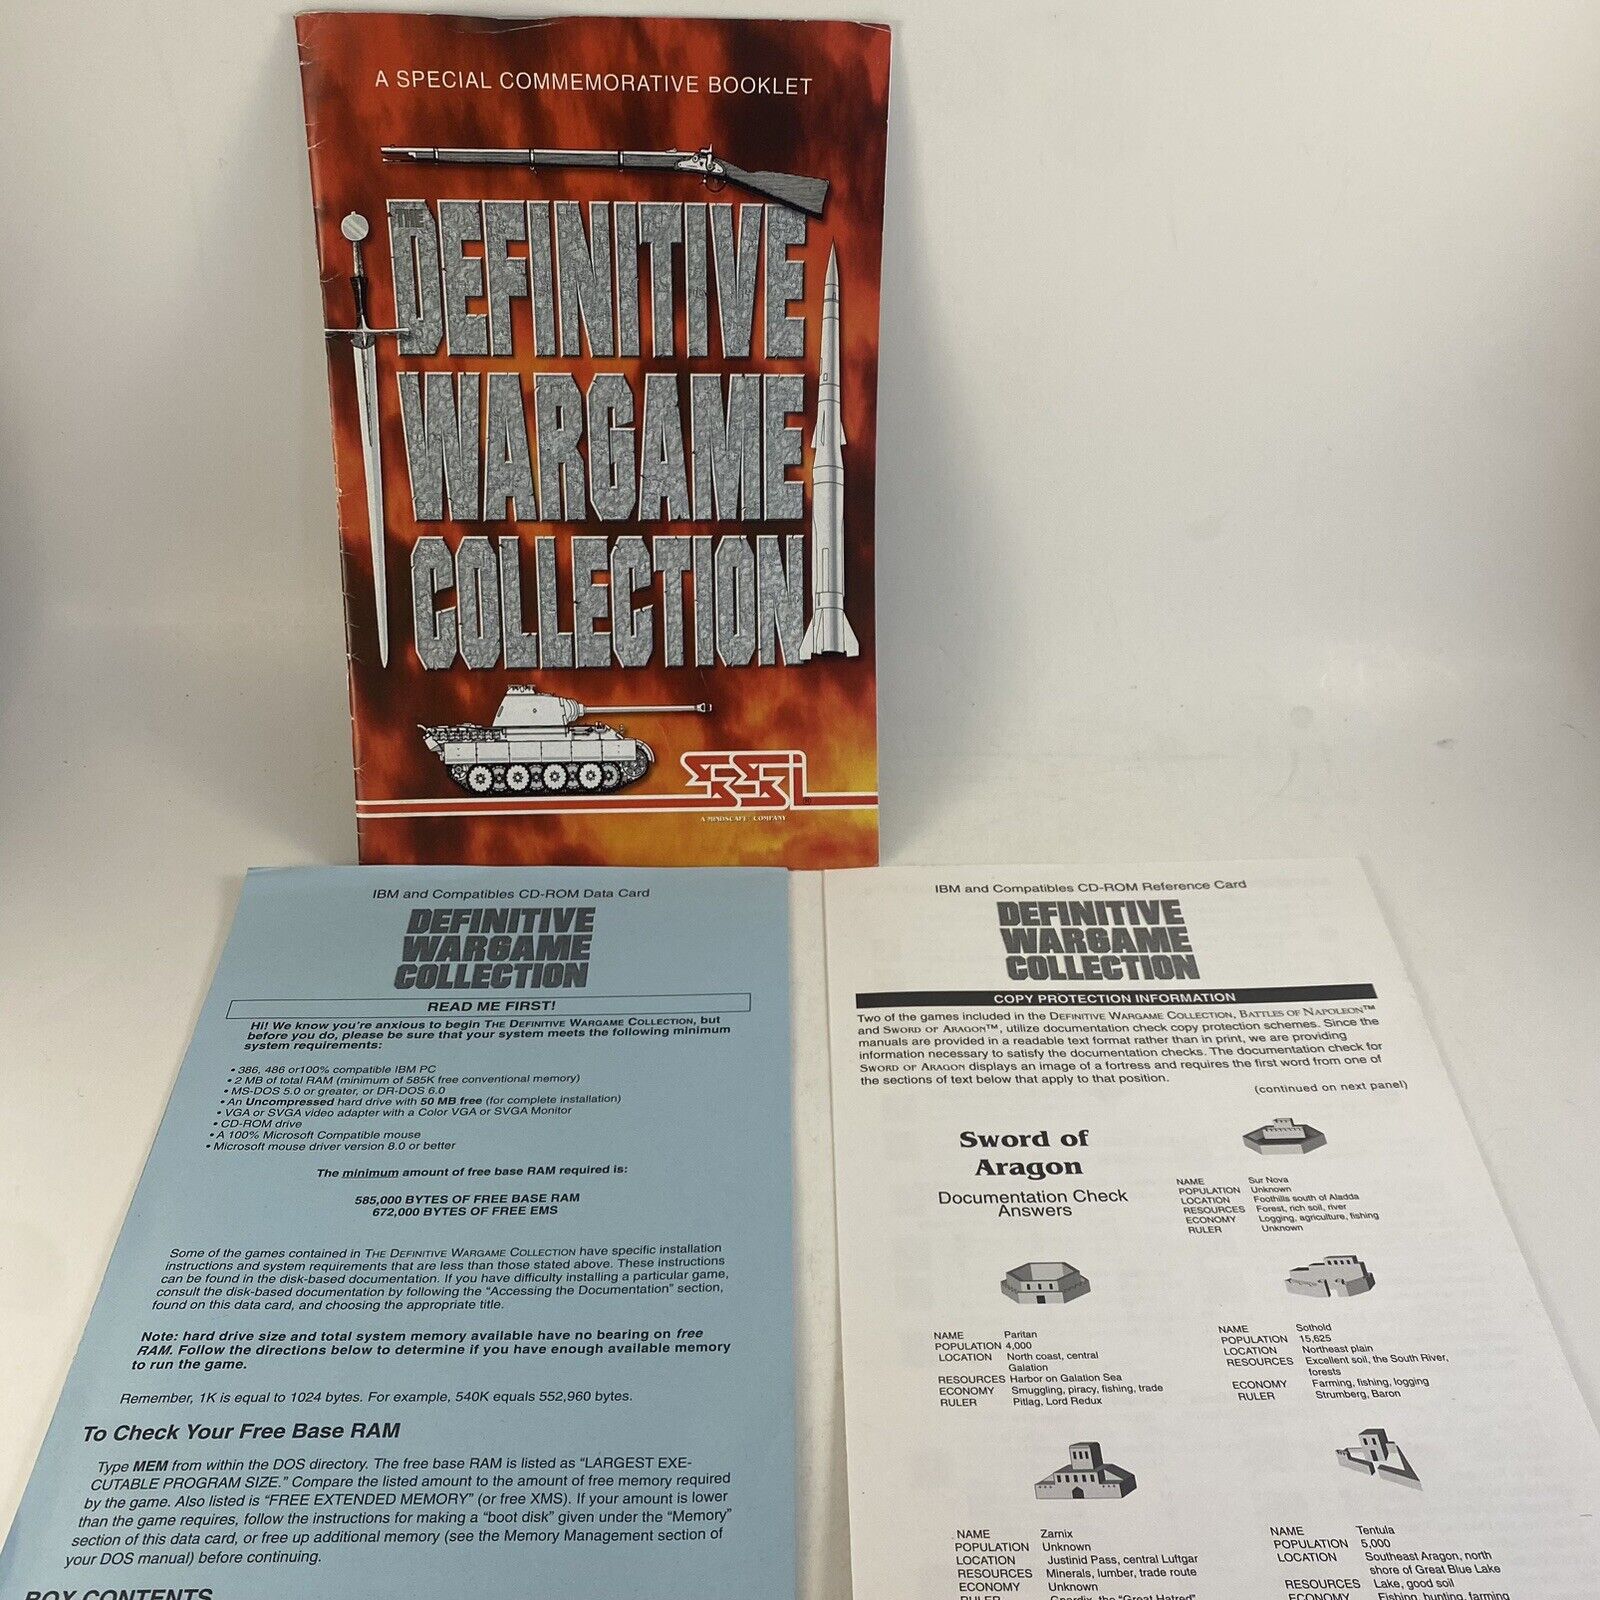 SSI Definitive Wargame Collection Commemorative Booklet And Inserts 1995